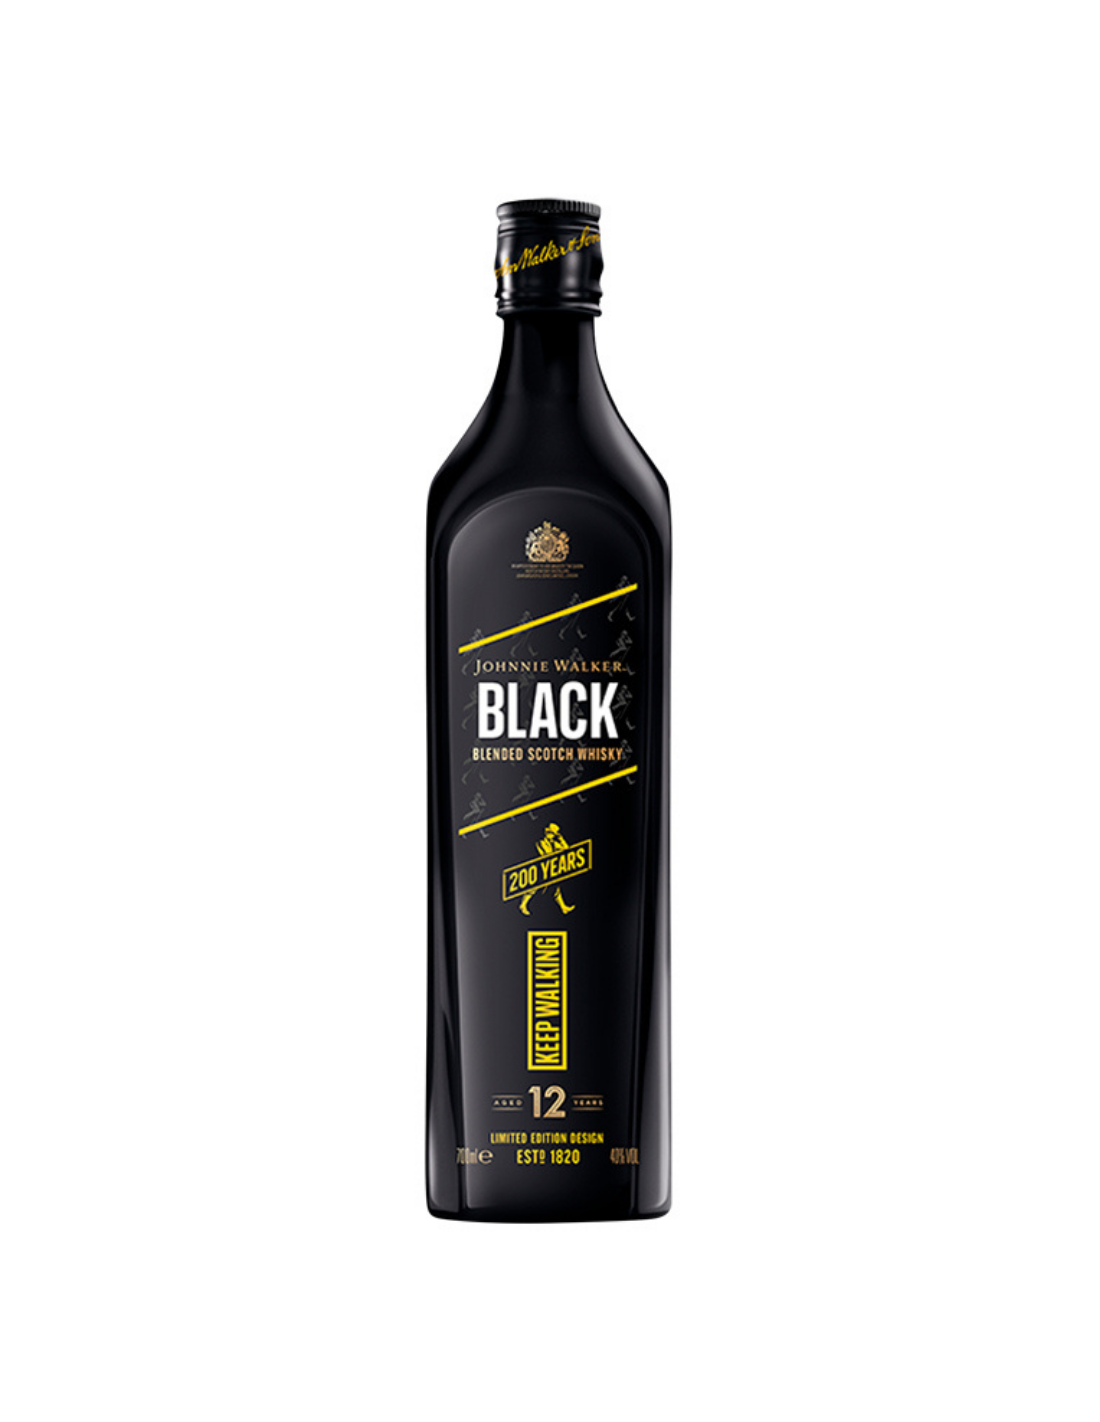 Whisky Johnnie Walker Icon Black 200 Years, 0.7L, 40% alc., Scotia